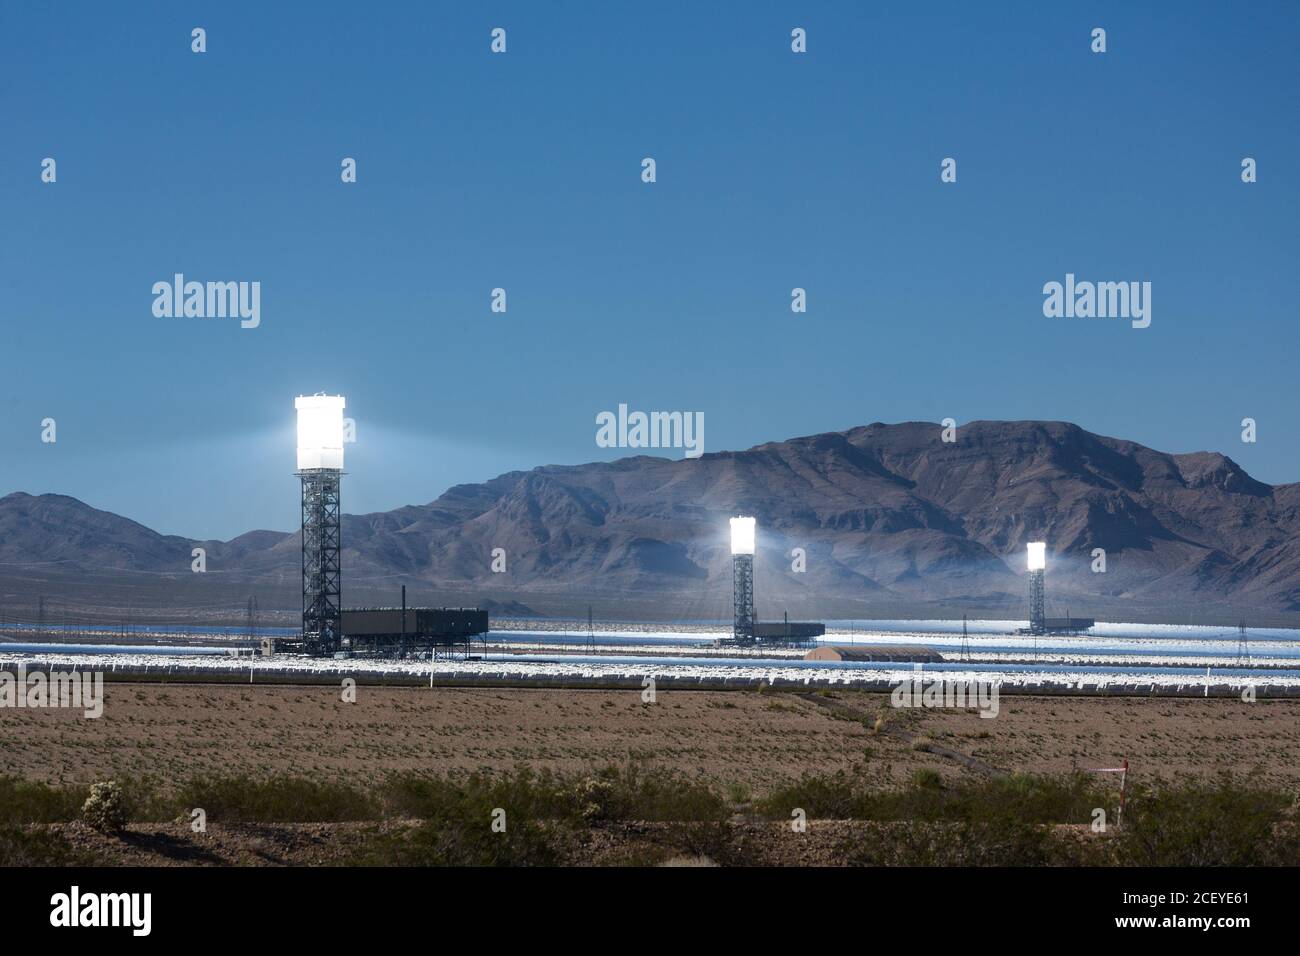 The Ivanpah Solar Power Facility, a concentrated solar thermal plant  in the Mojave Desert near Ivanpah, California and Primm, Nevada, is one of the l Stock Photo